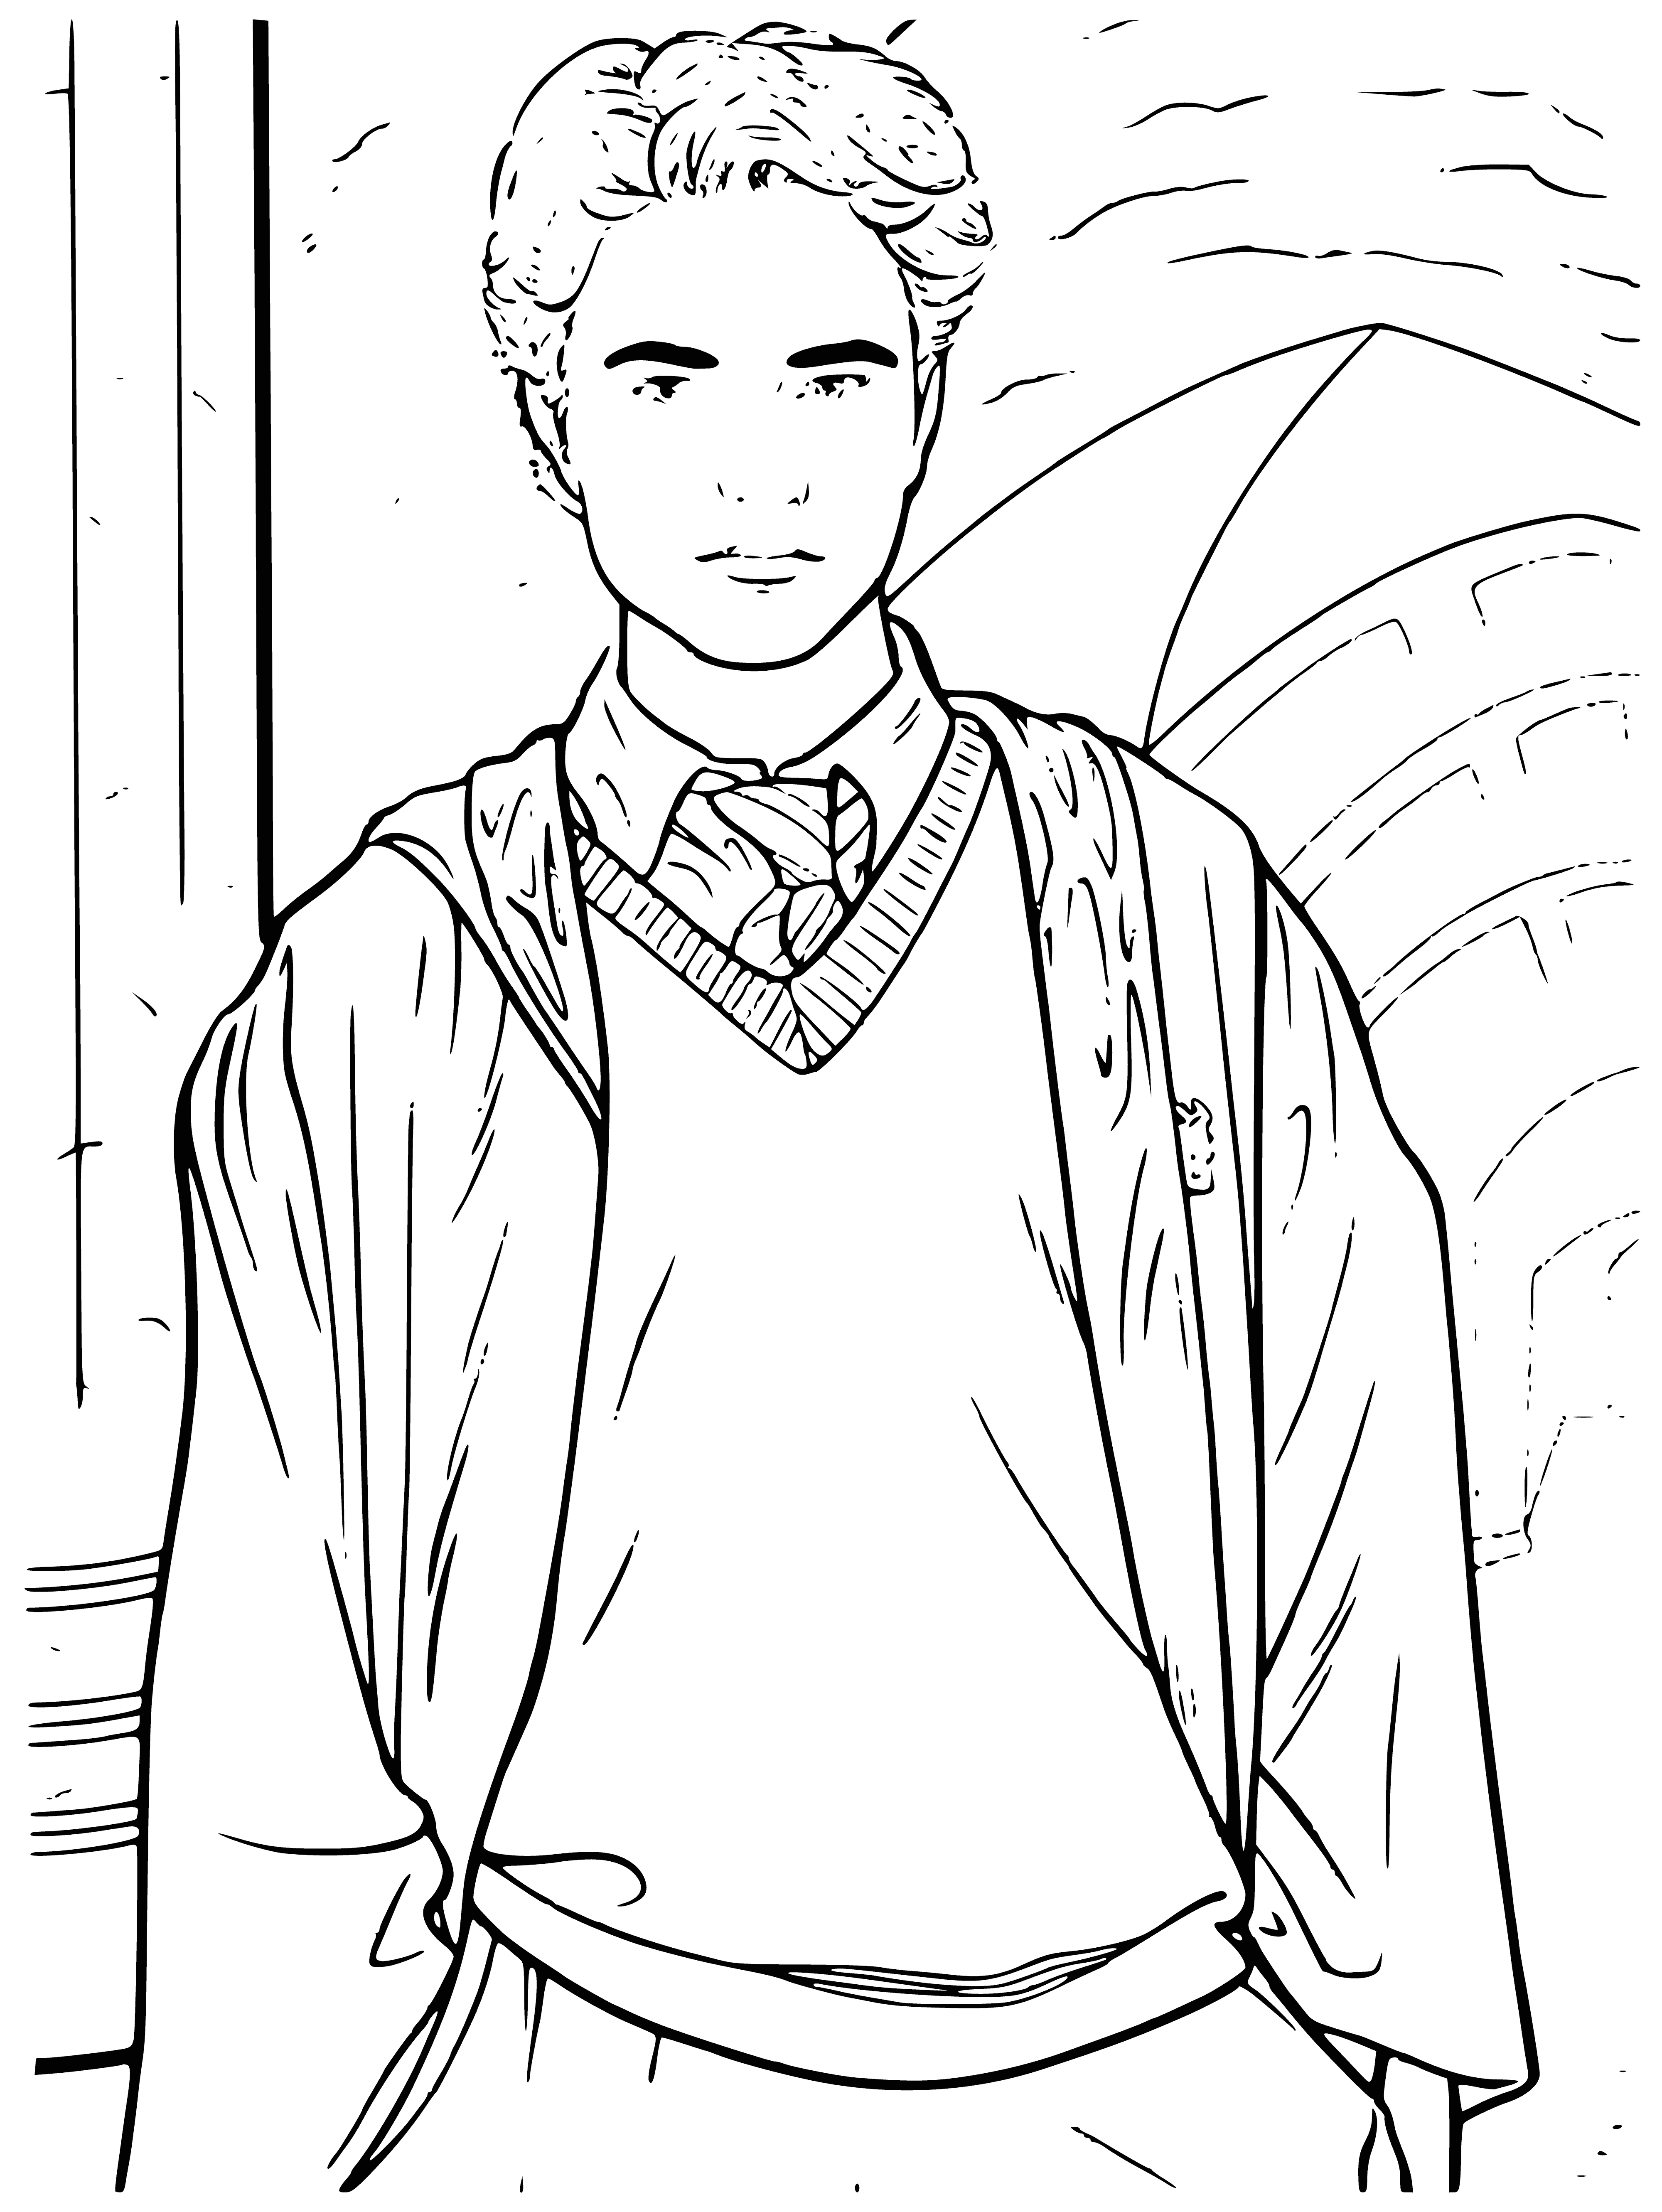 Cedric Diggory coloring page